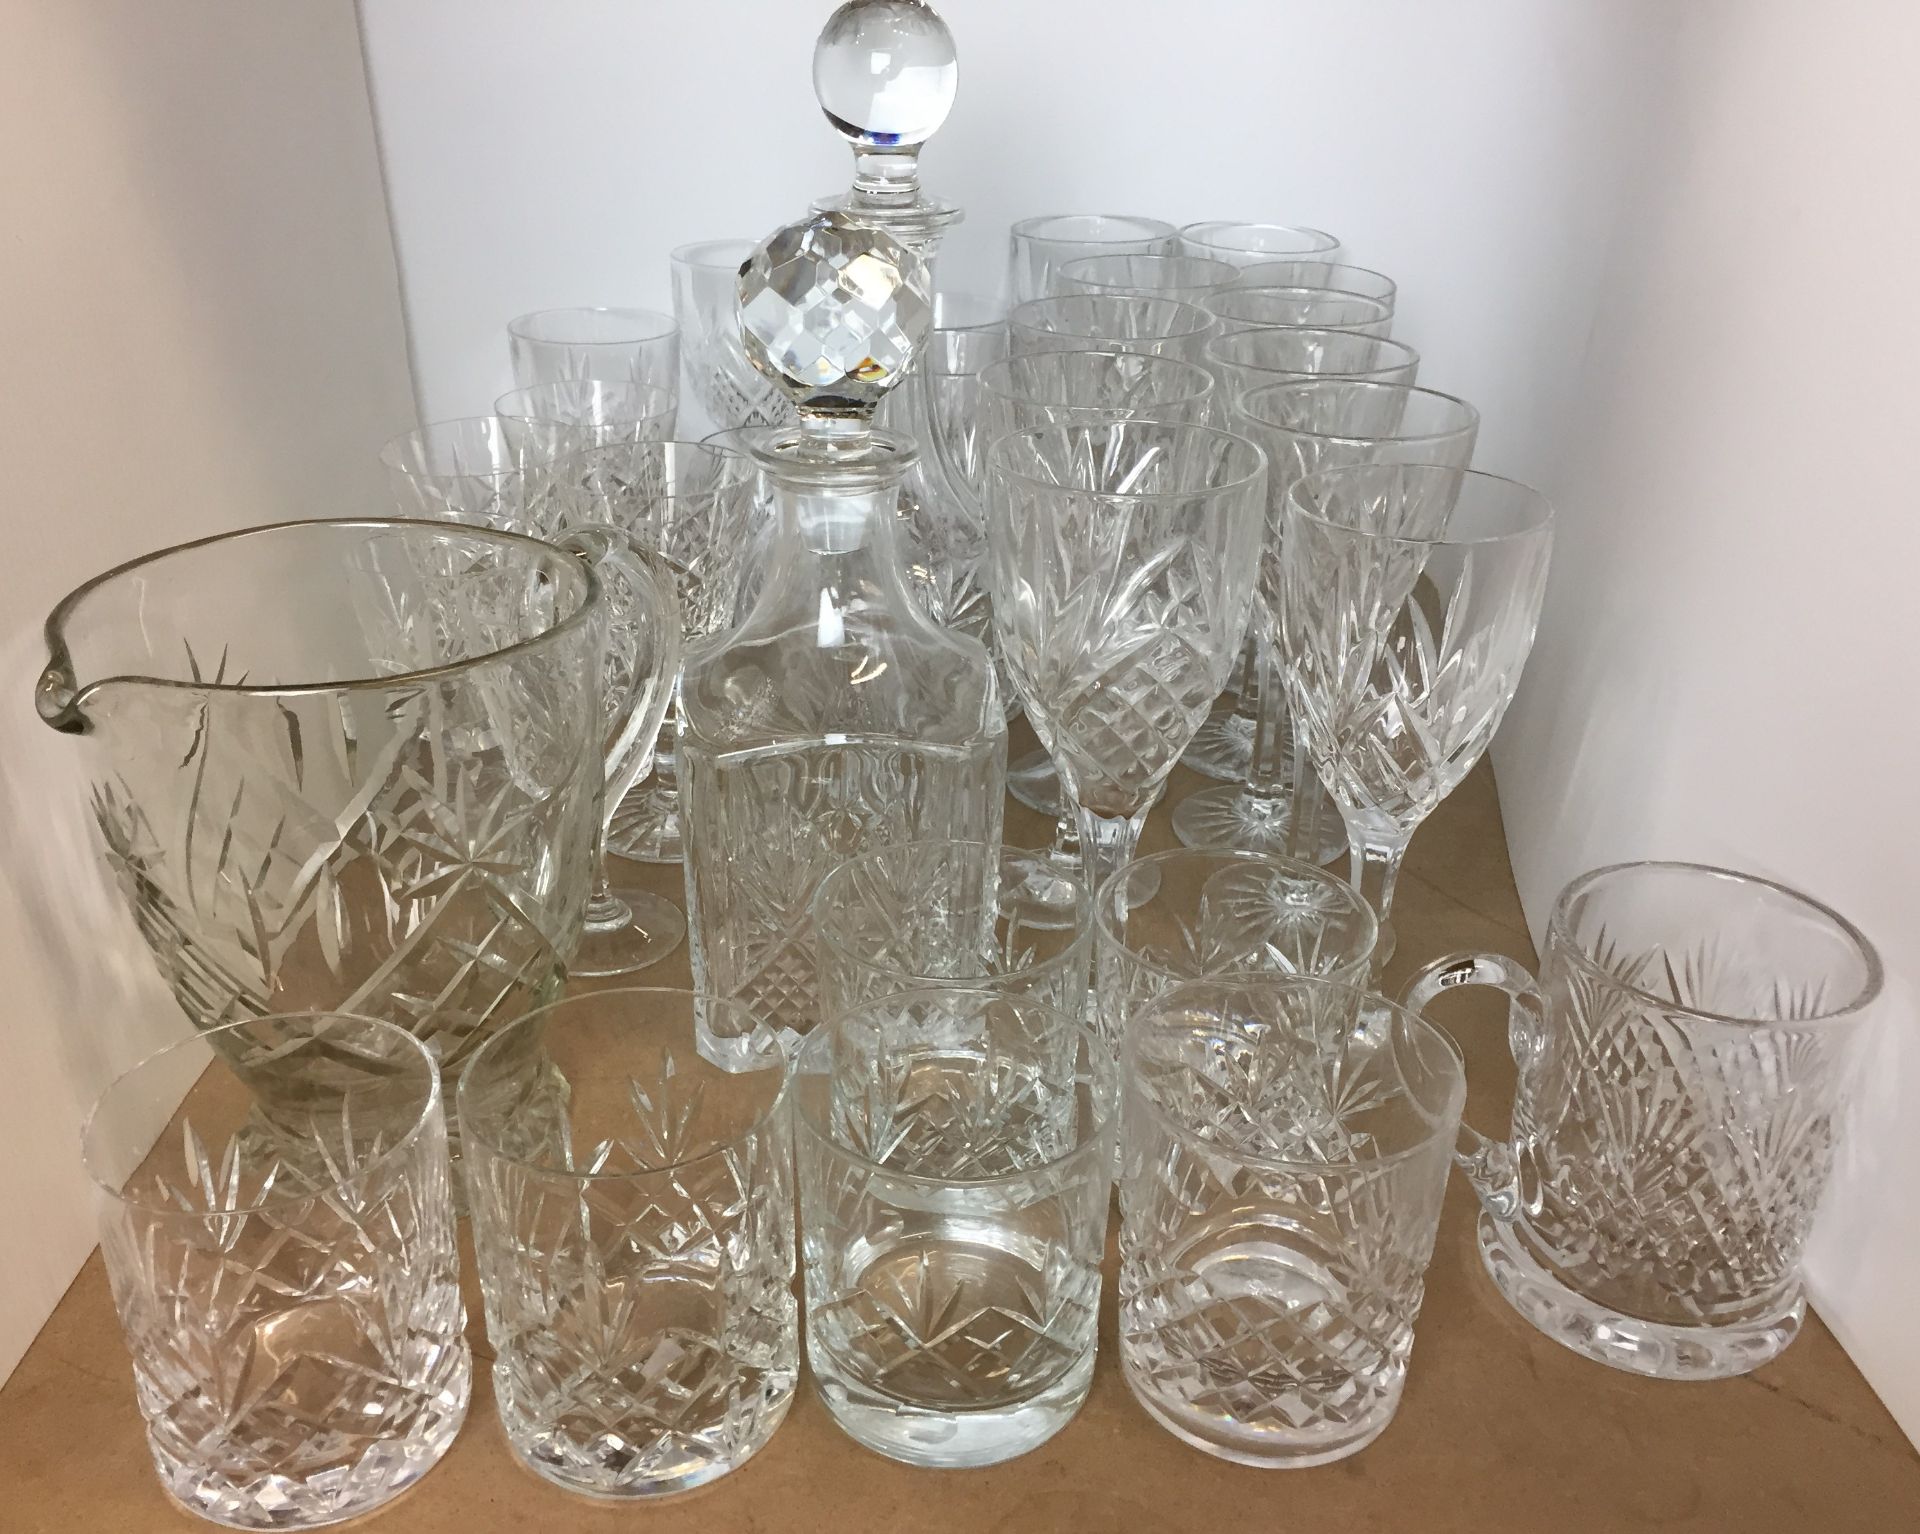 Thirty three items of cut glass including whisky decanter, wine decanter, water jug, wine glasses,